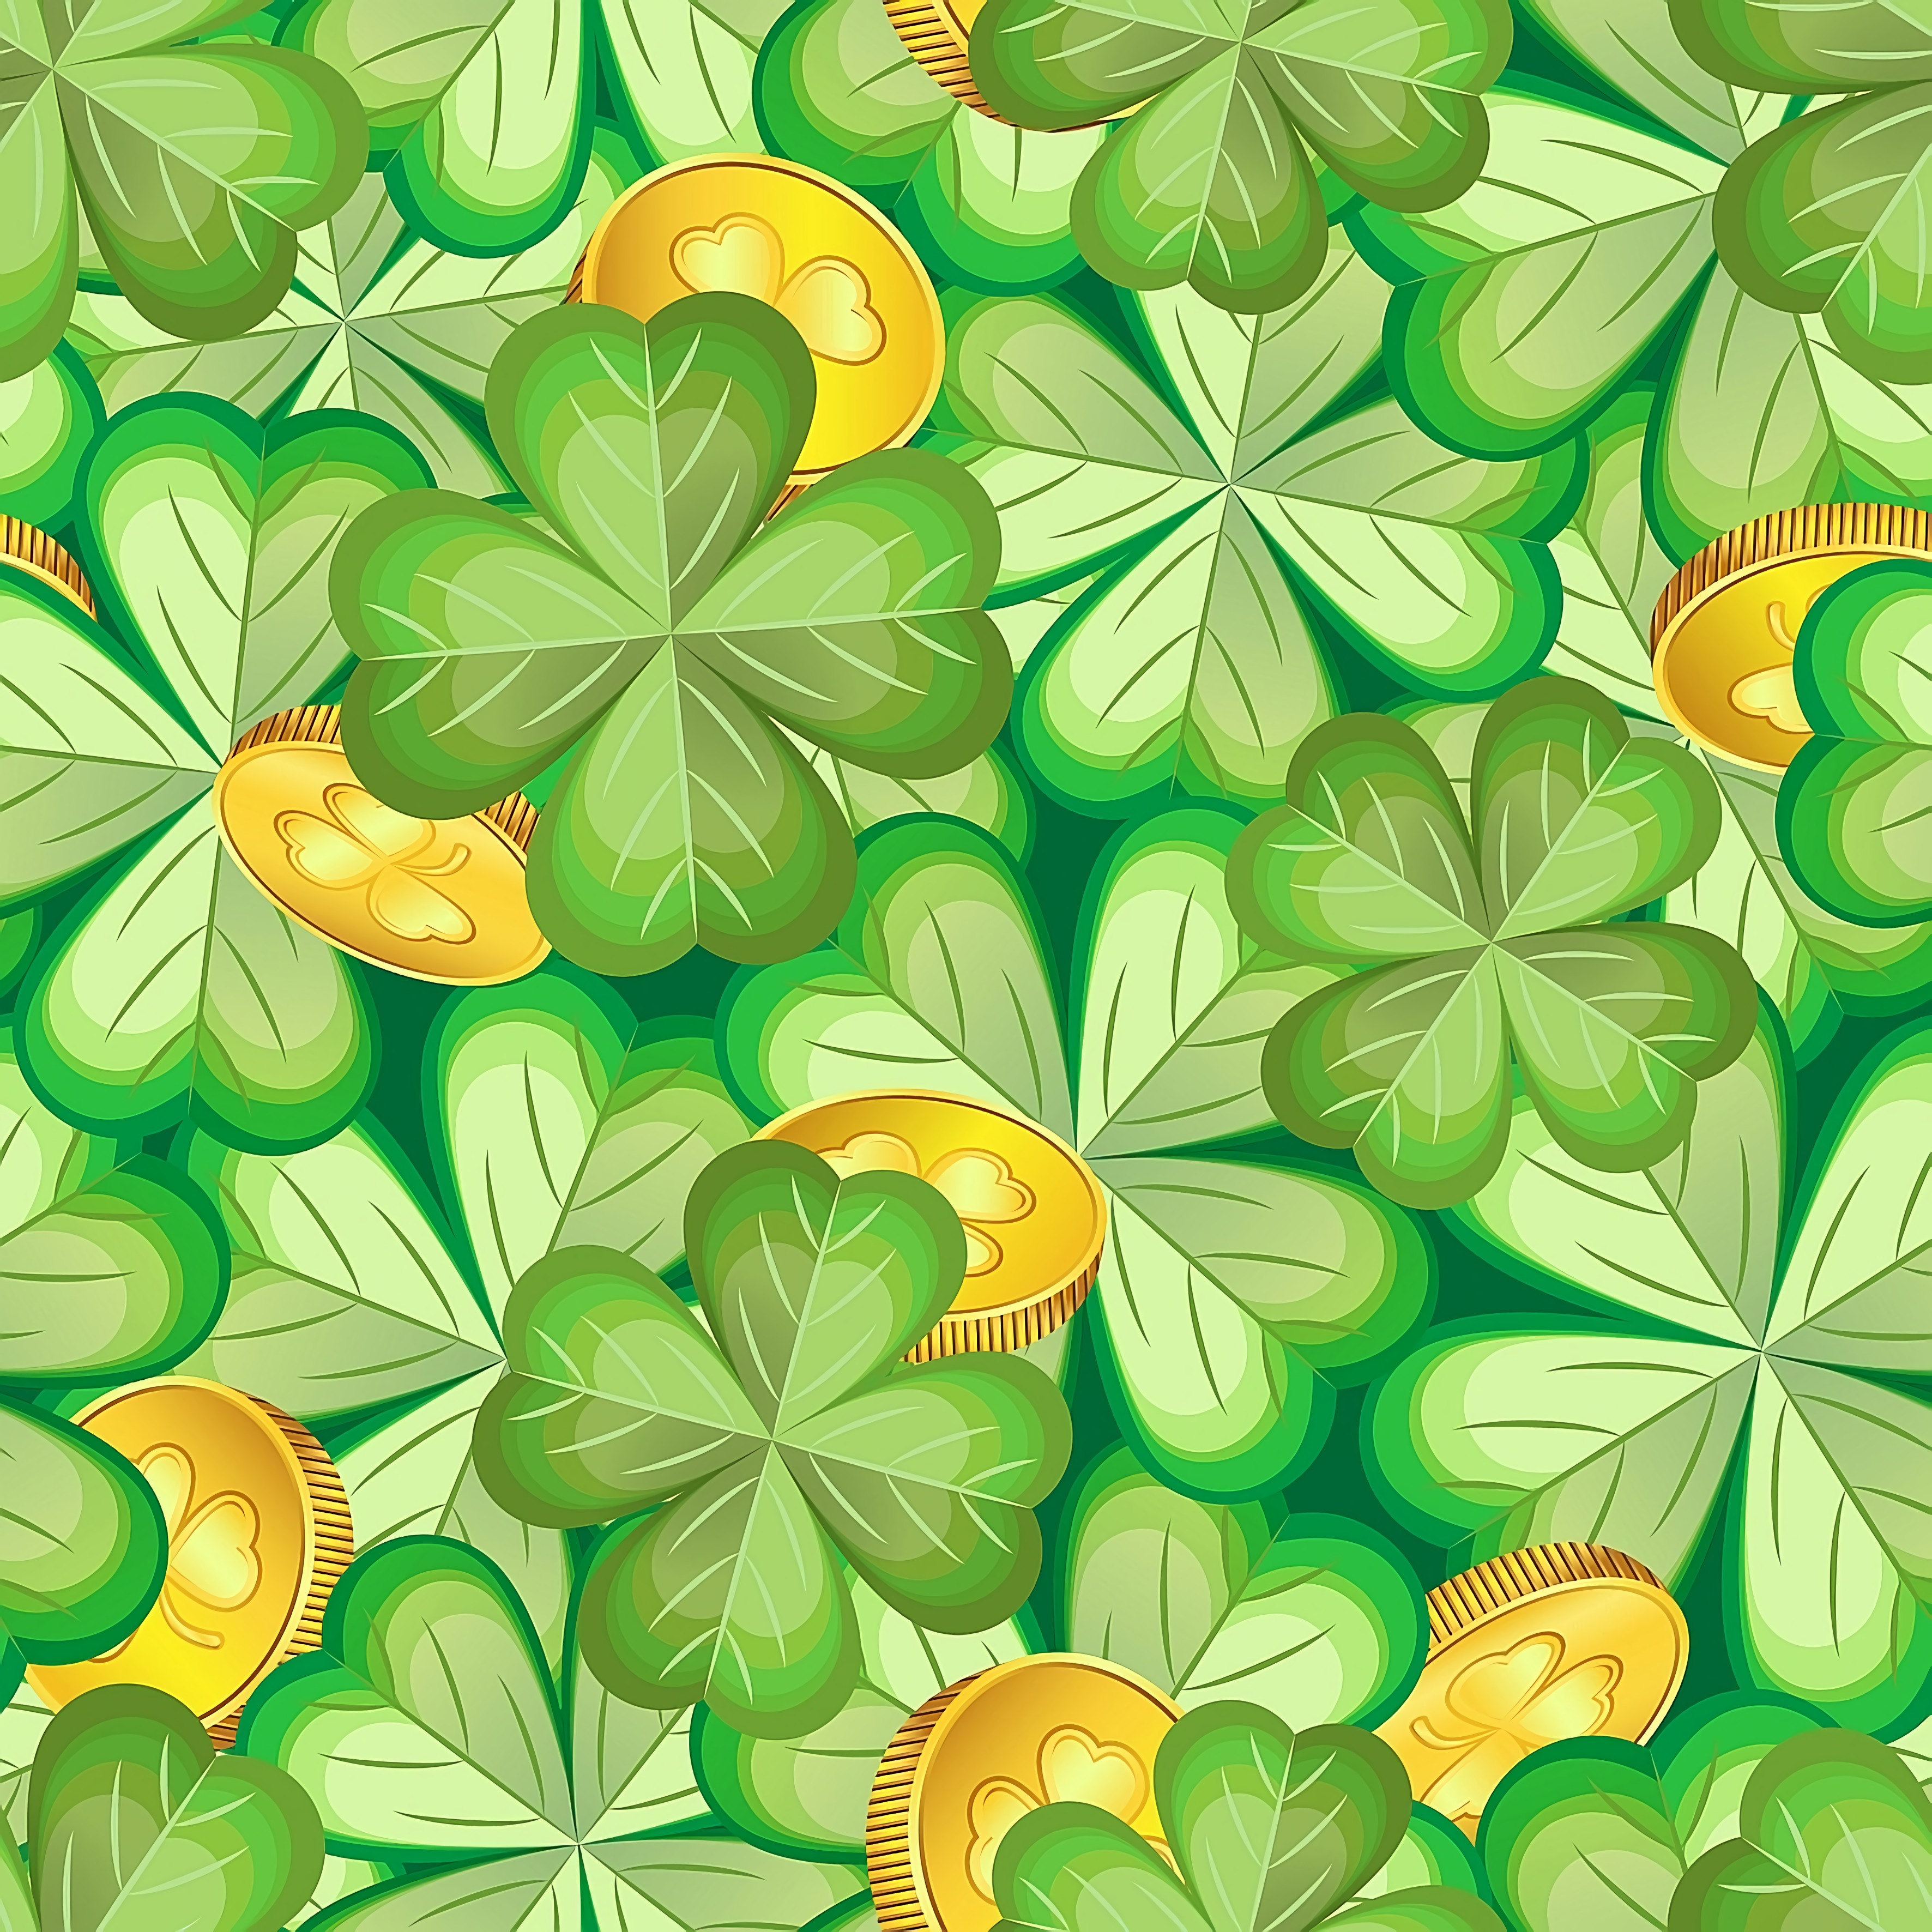 50776 download wallpaper textures, pattern, texture, luck, clover, coin screensavers and pictures for free